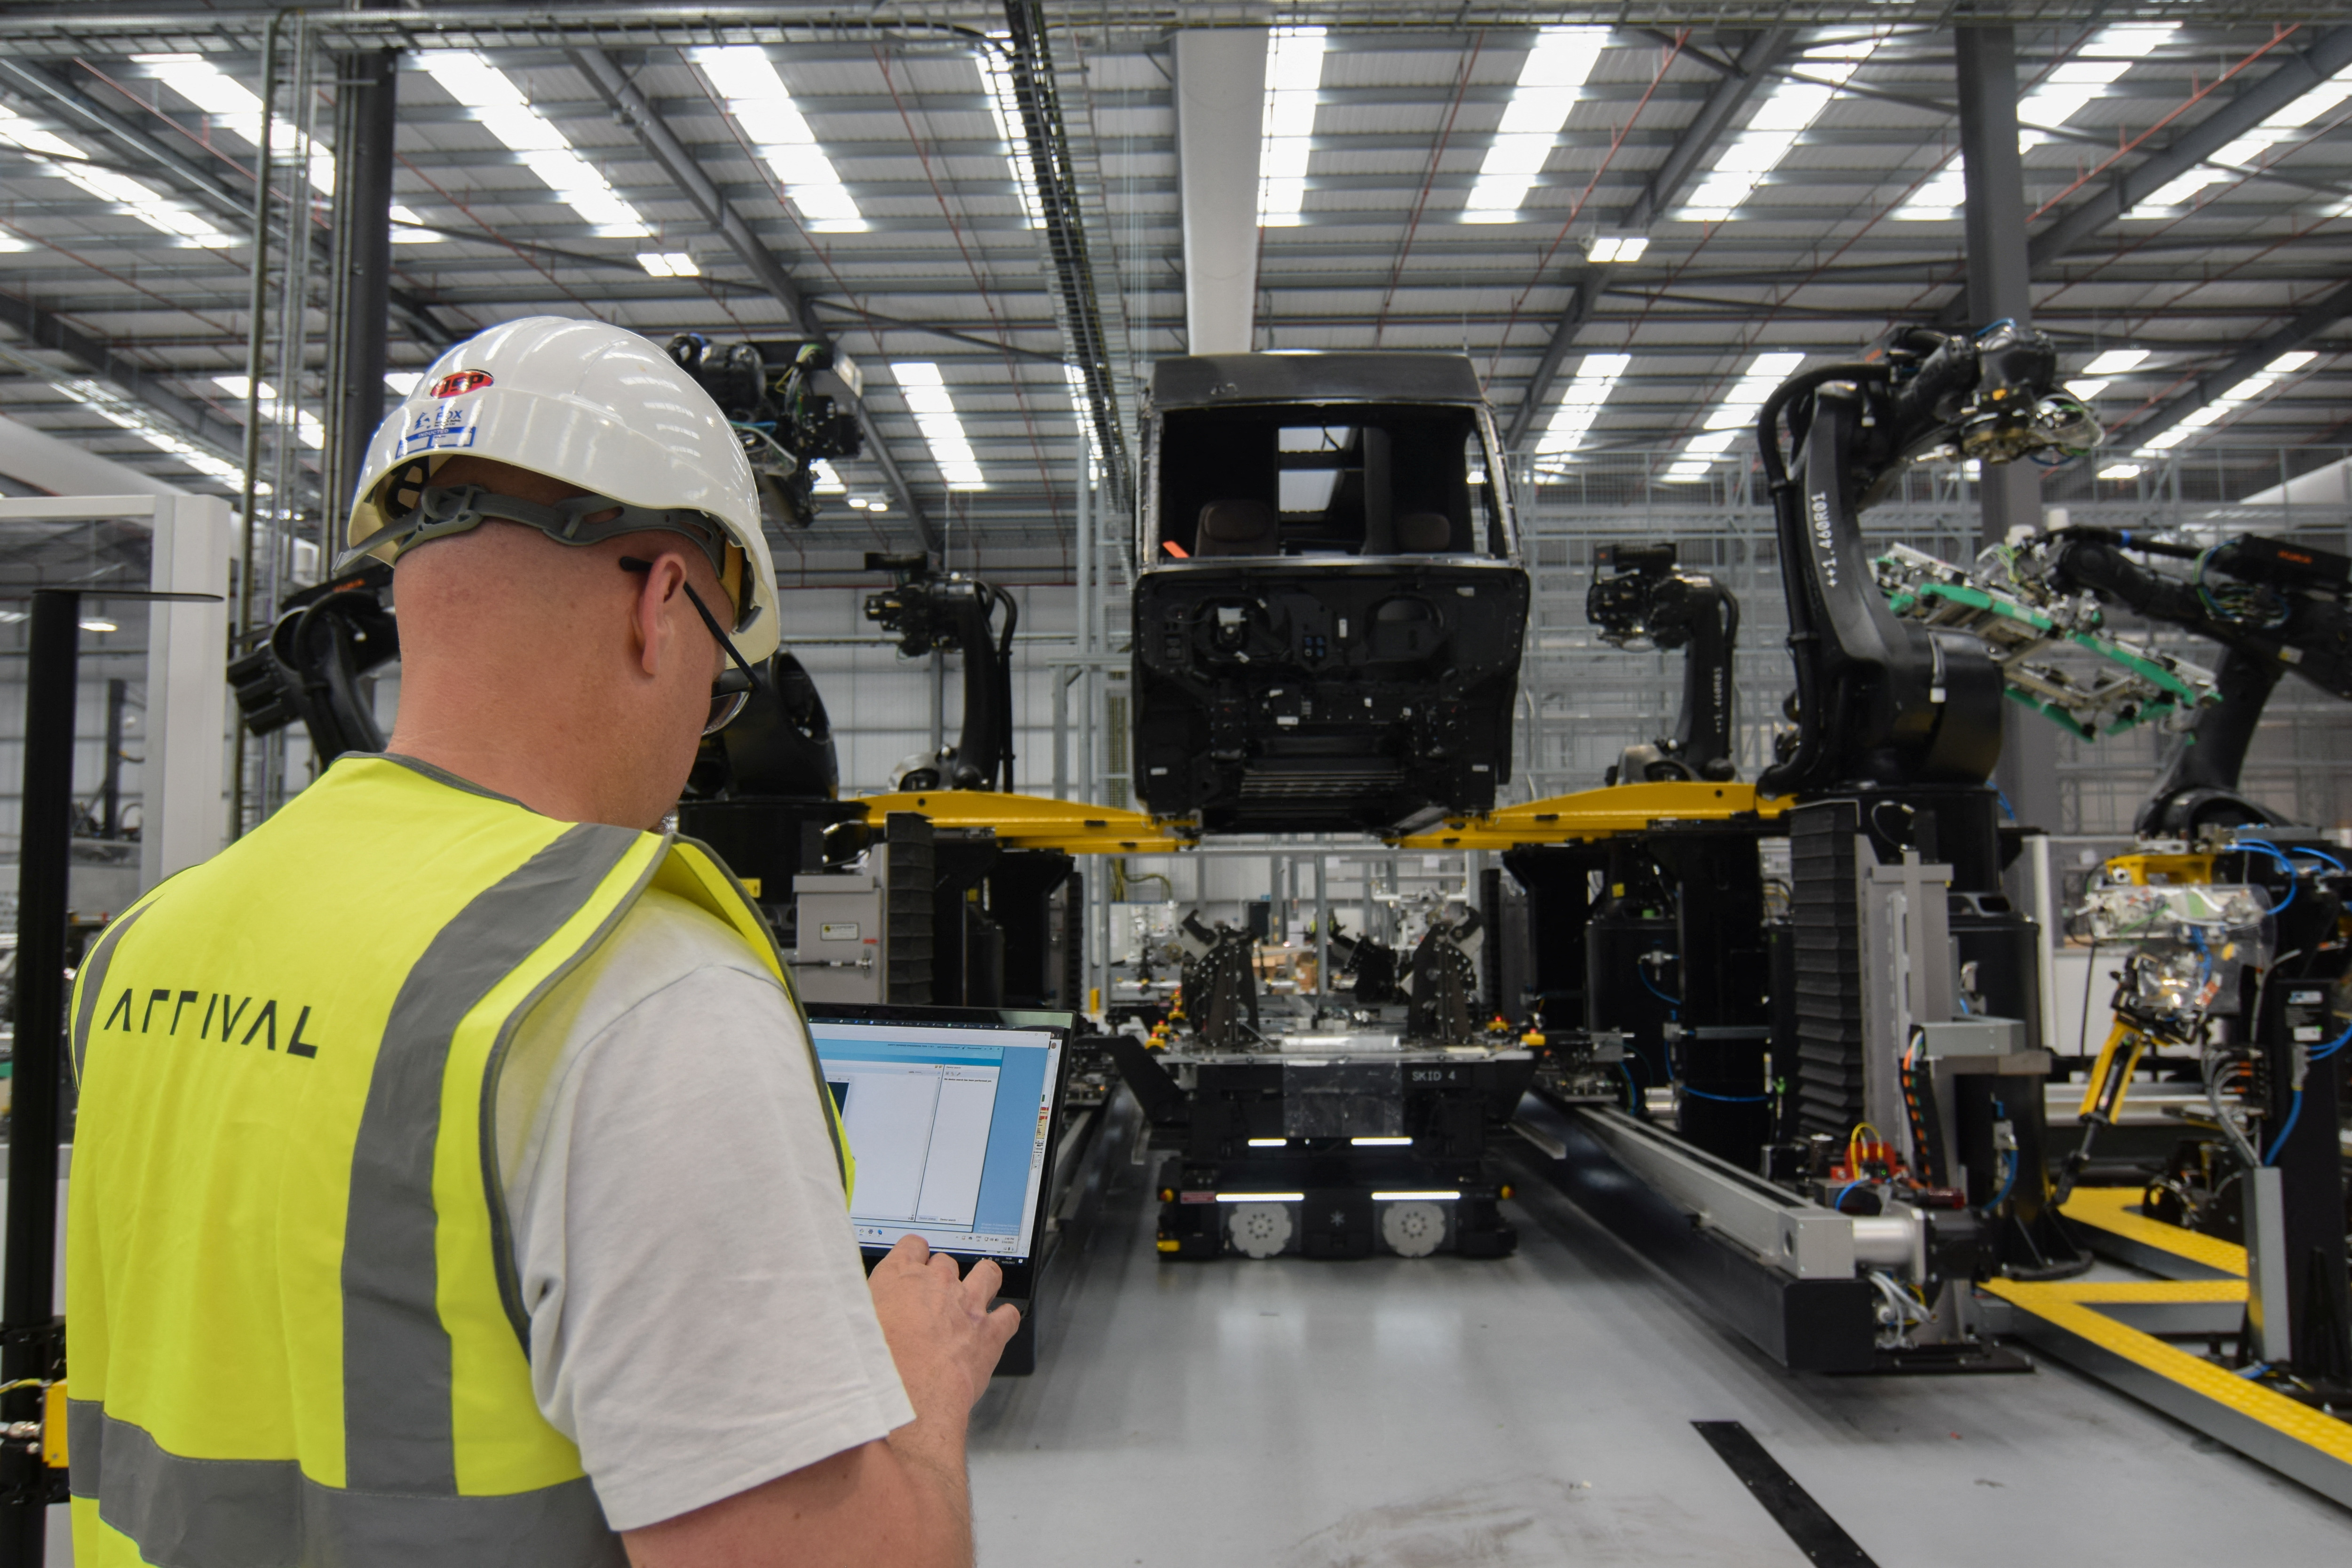 An engineer at electric van maker Arrival checks a prototype vehicle under construction at the company's factory in Bicester